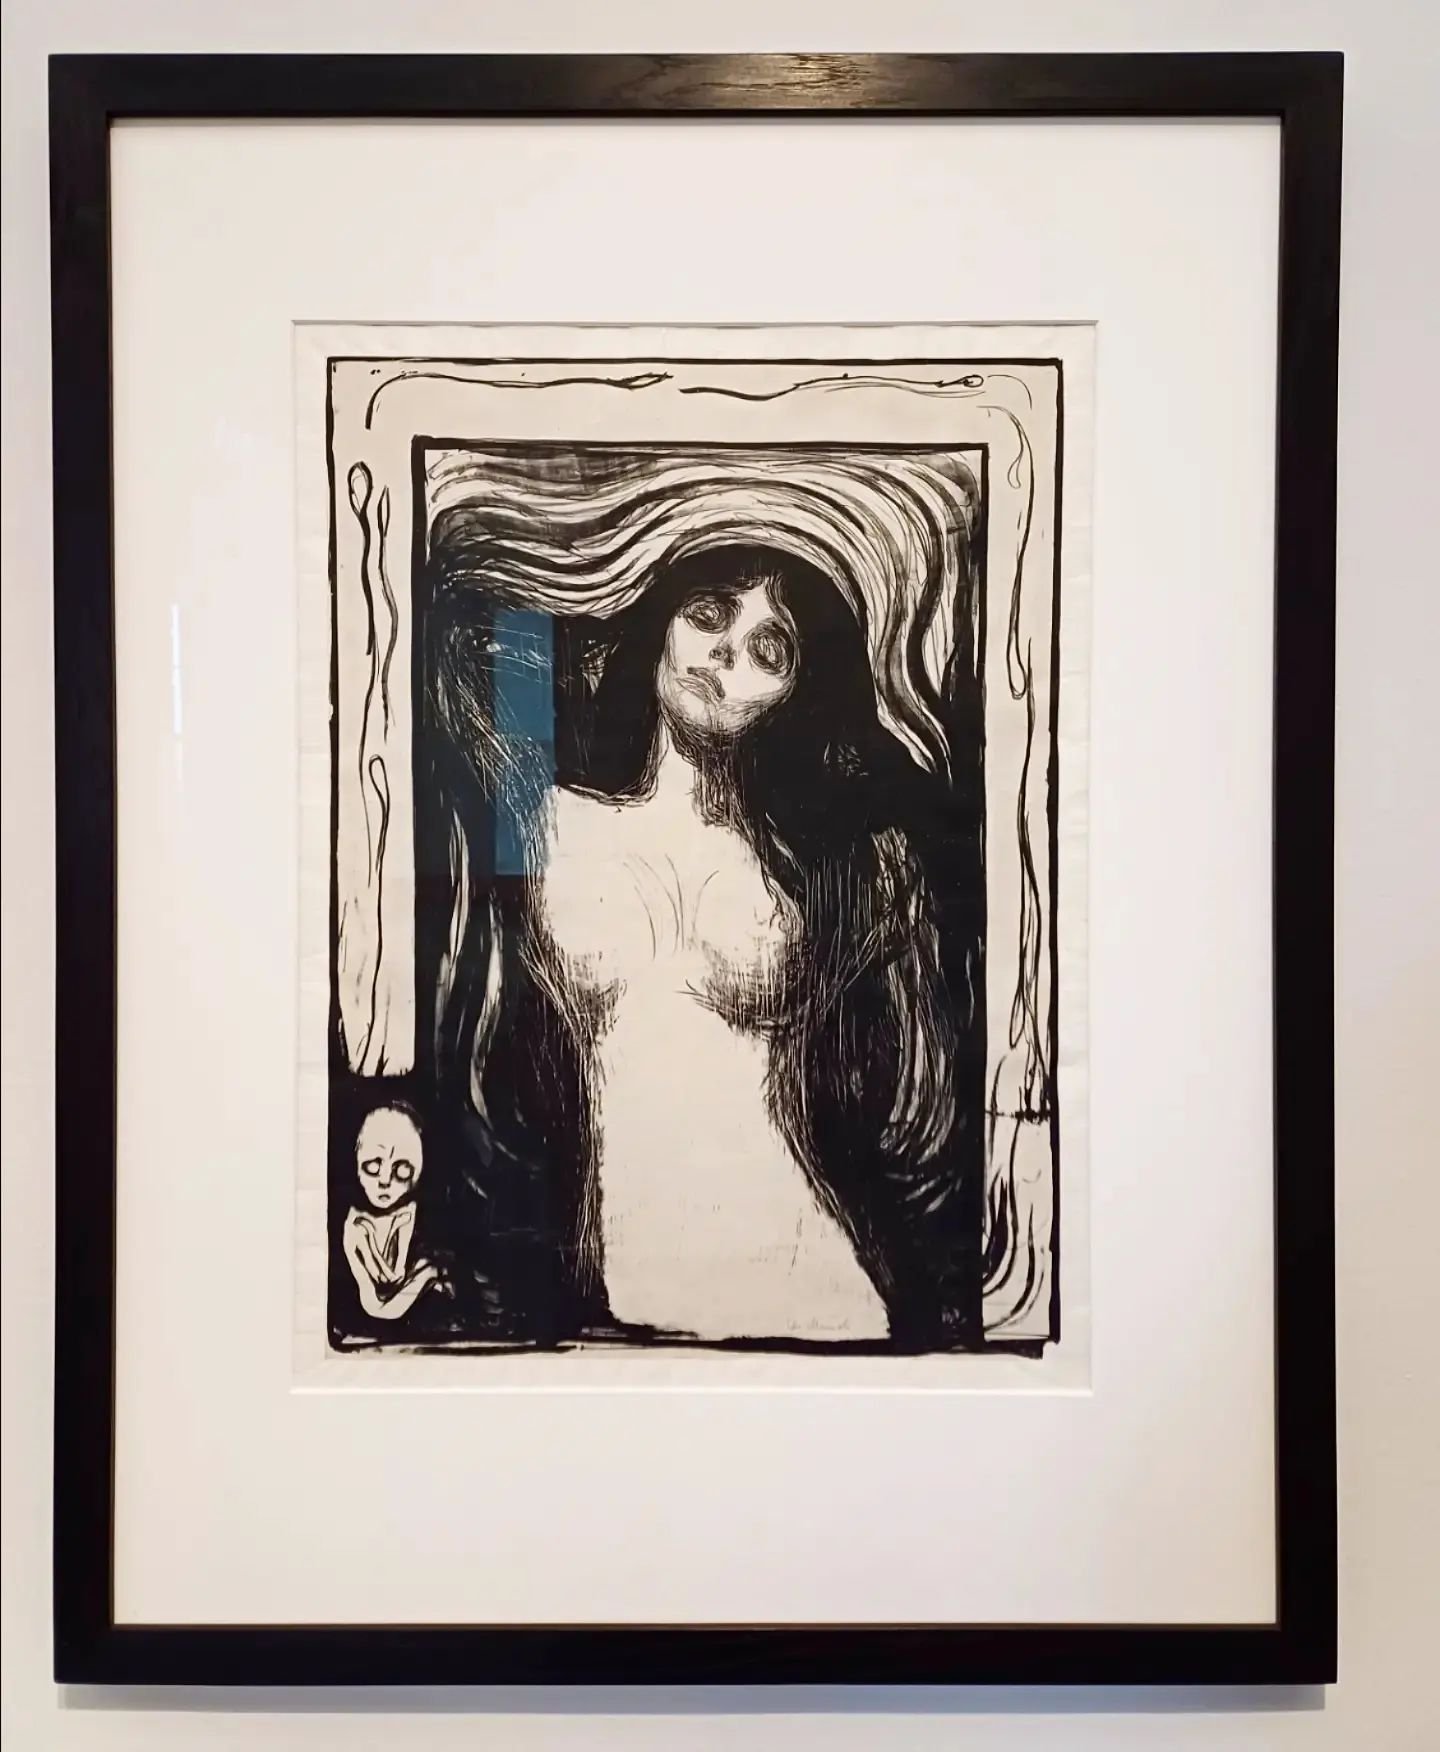 Highlights from my recent artist residency @edinburghprintmakers l wanted to share some of the sights &amp; experiences of this wonderful city.

Edvard Munch's Madonna @natgalleriessco
He made over 100 unique variations of this print.

Do Ho Suh - in